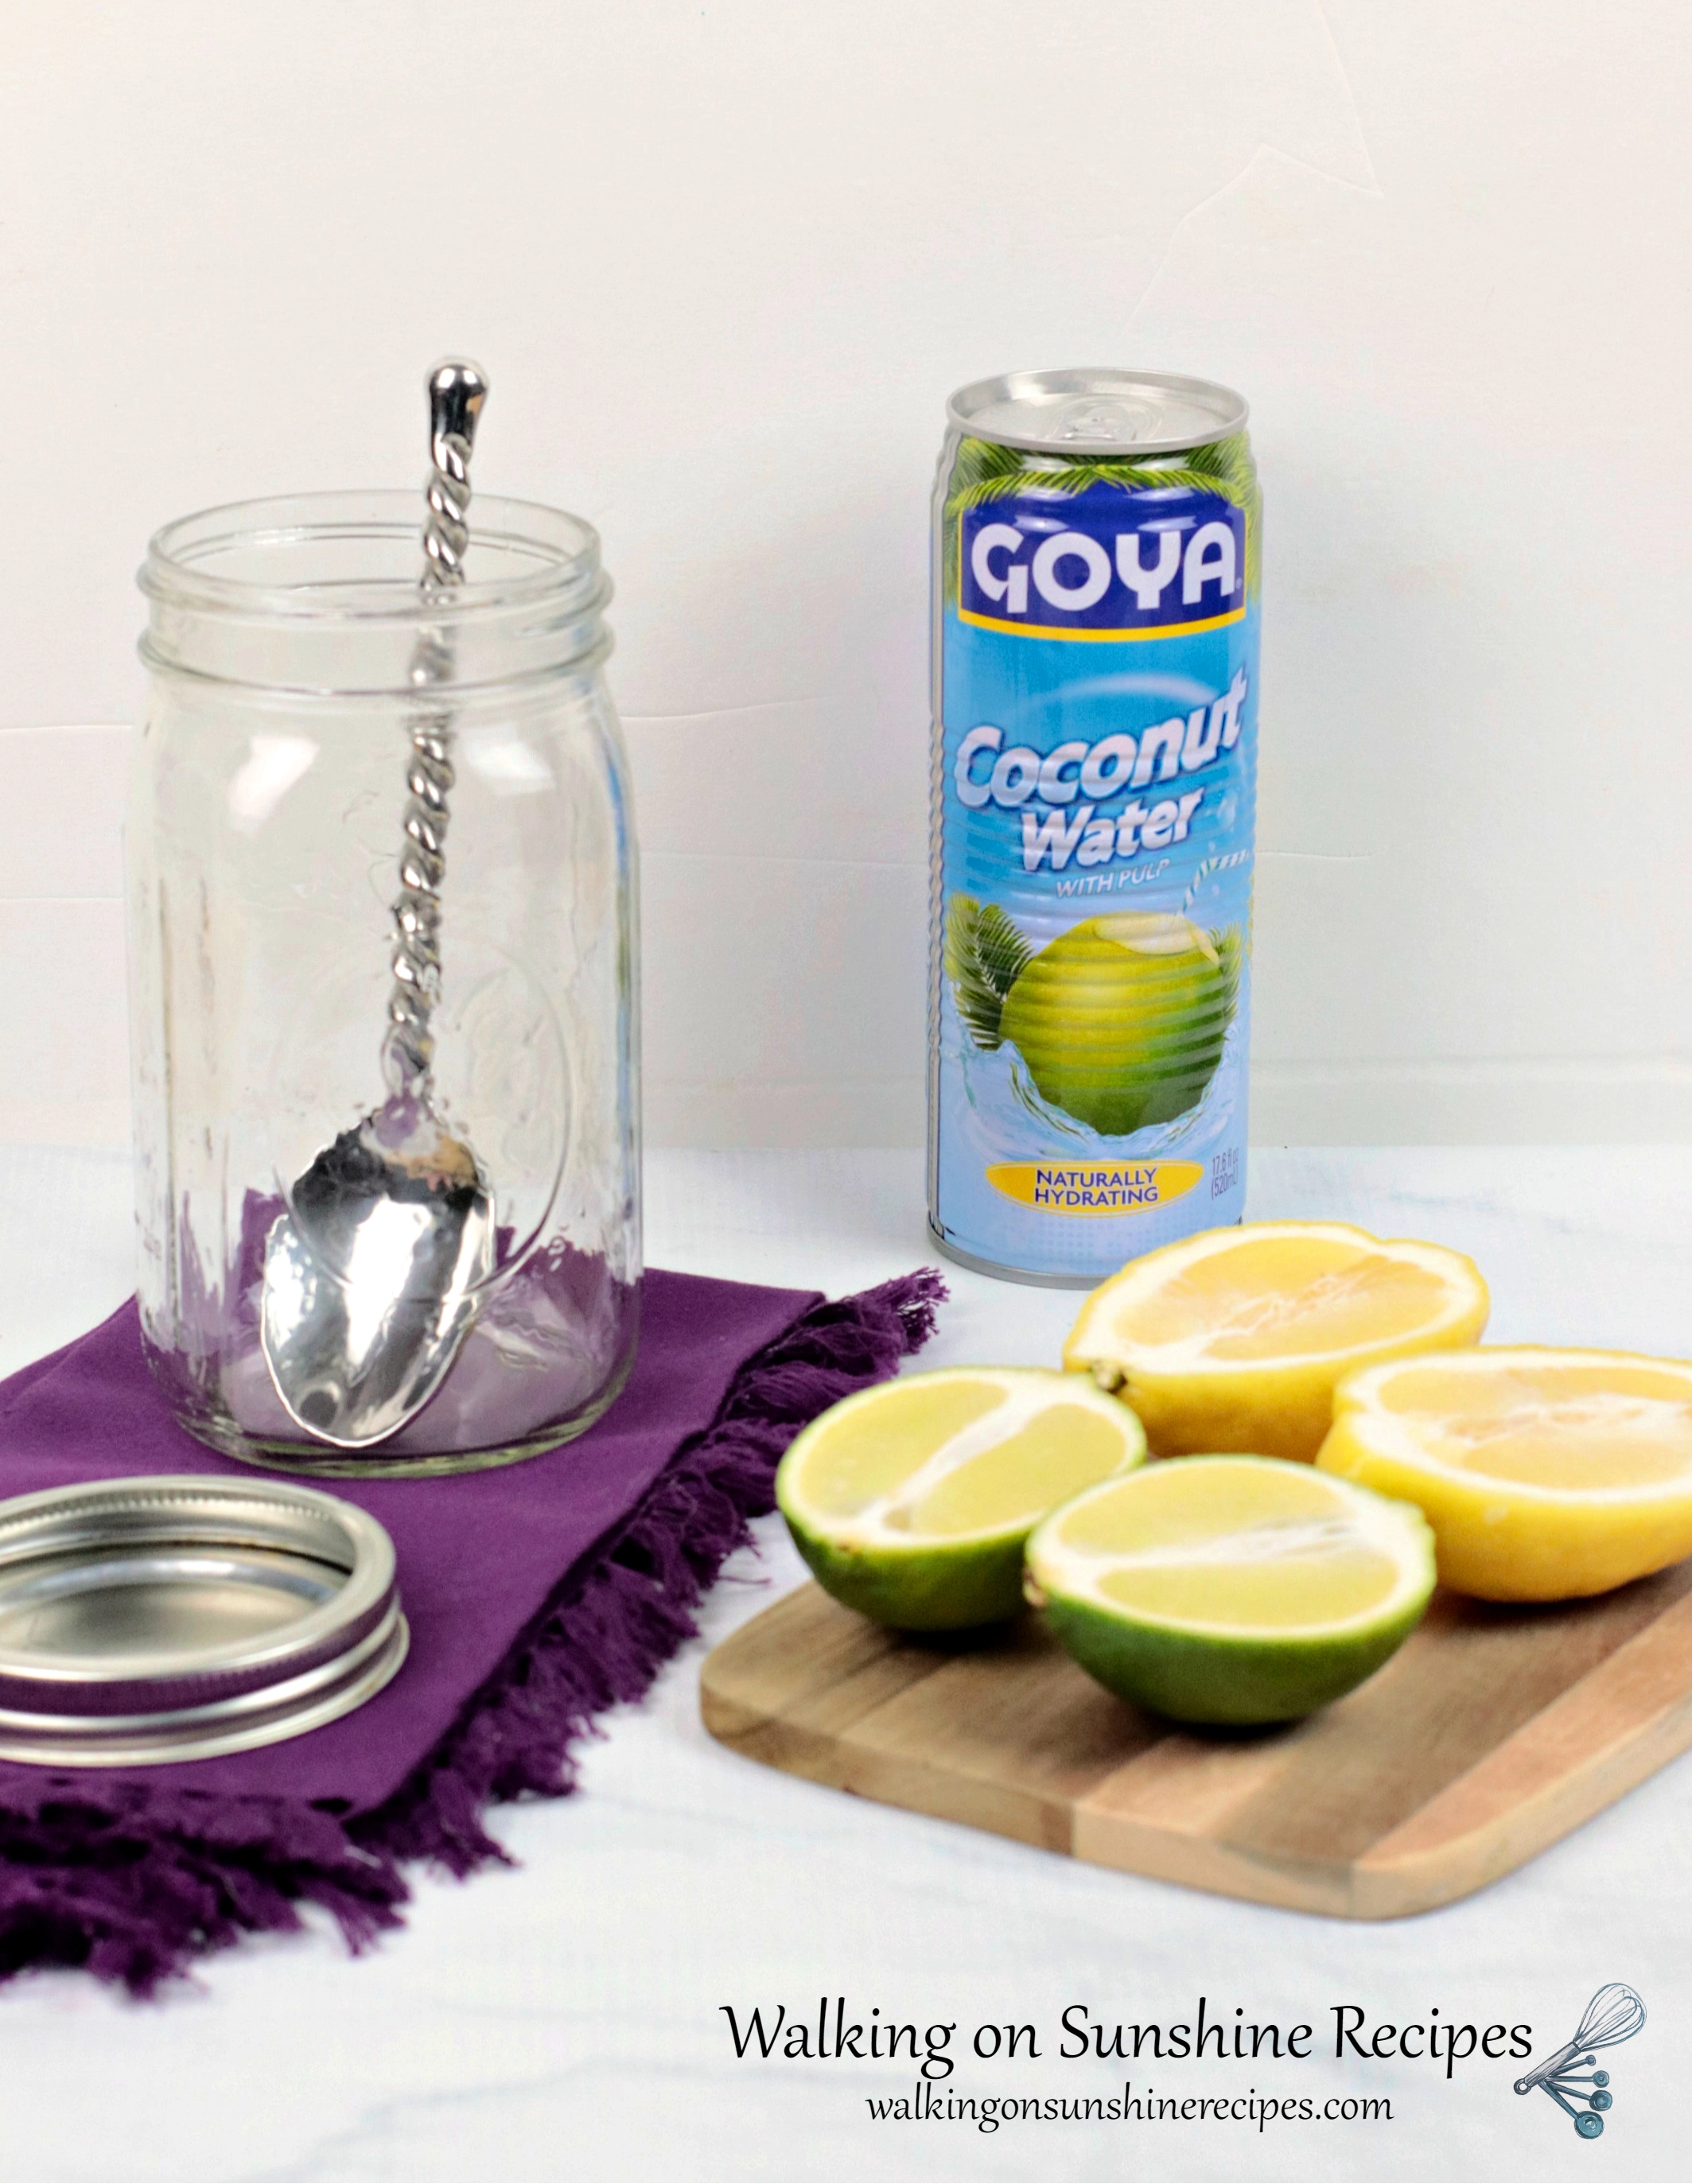 Lemon lime water ingredients and tools. Can of Goya coconut water, lemon cut in half, lime cut in half displayed on wood cutting board. Empty mason jar with large metal spoon inside on top of a purple cloth napkin. 